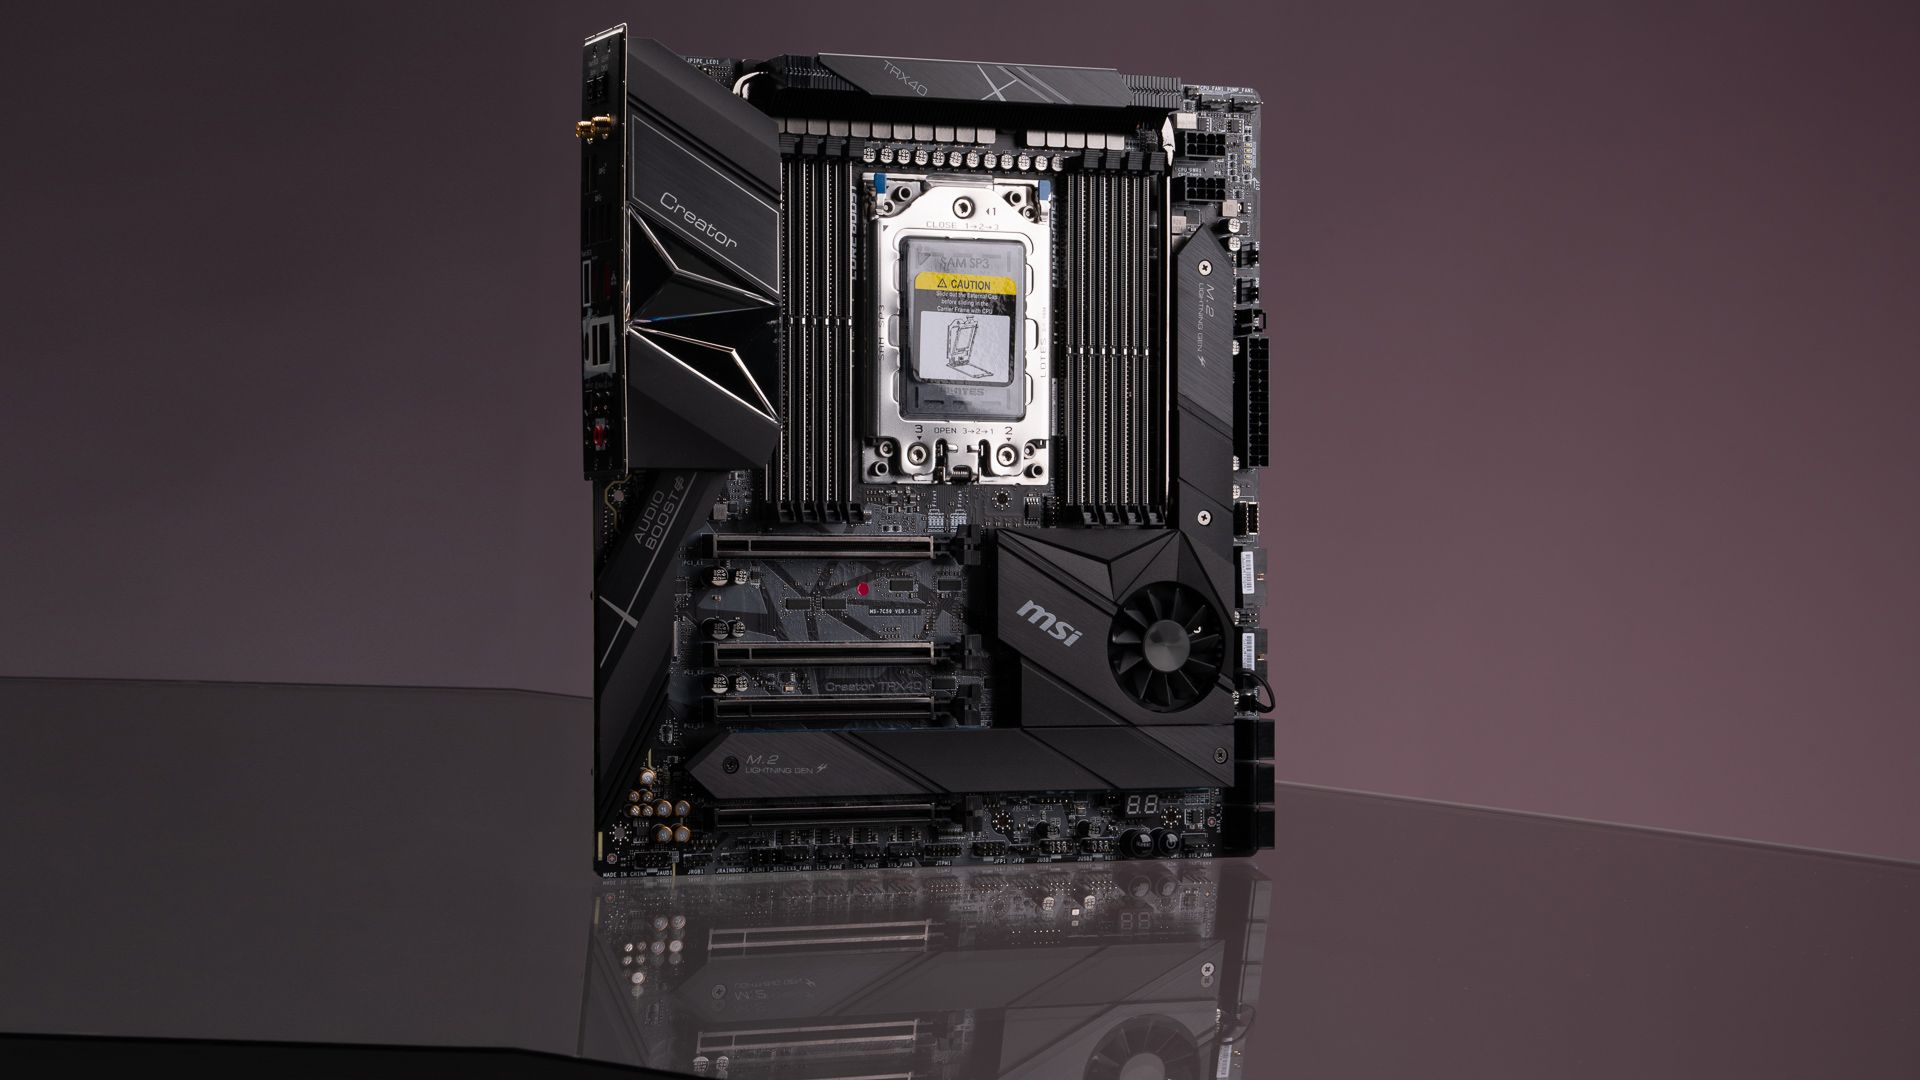 The MSI TRX40 Creator motherboard is a content creator's best friend